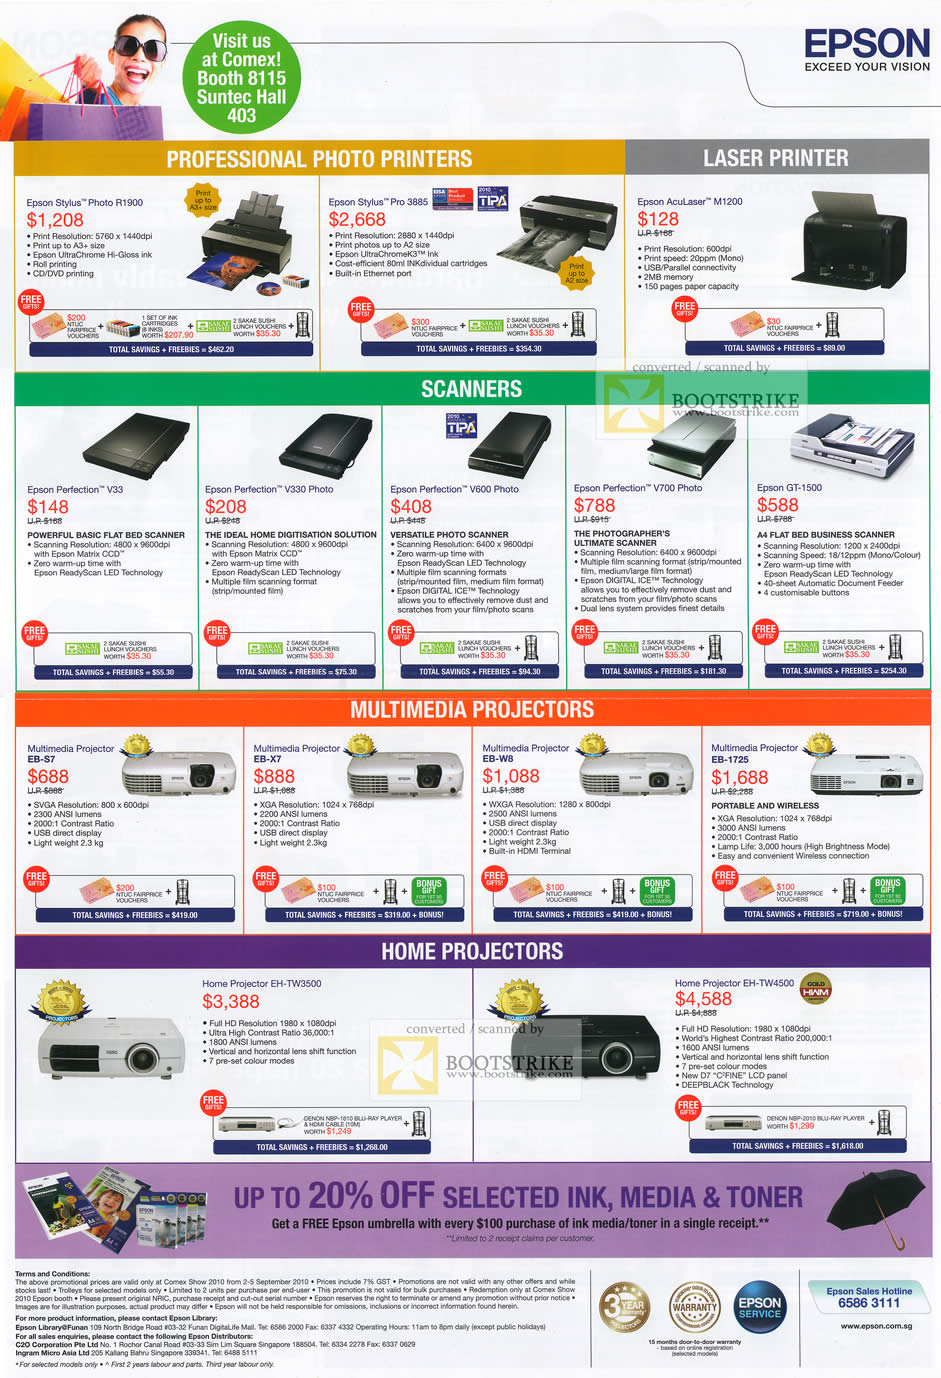 Comex 2010 price list image brochure of Epson Professional Photo Printers Stylus Photo AcuLaser M1200 Scanners Perfection V33 V330 V700 Projectors EB S7 X7 W8 1725 TW3500